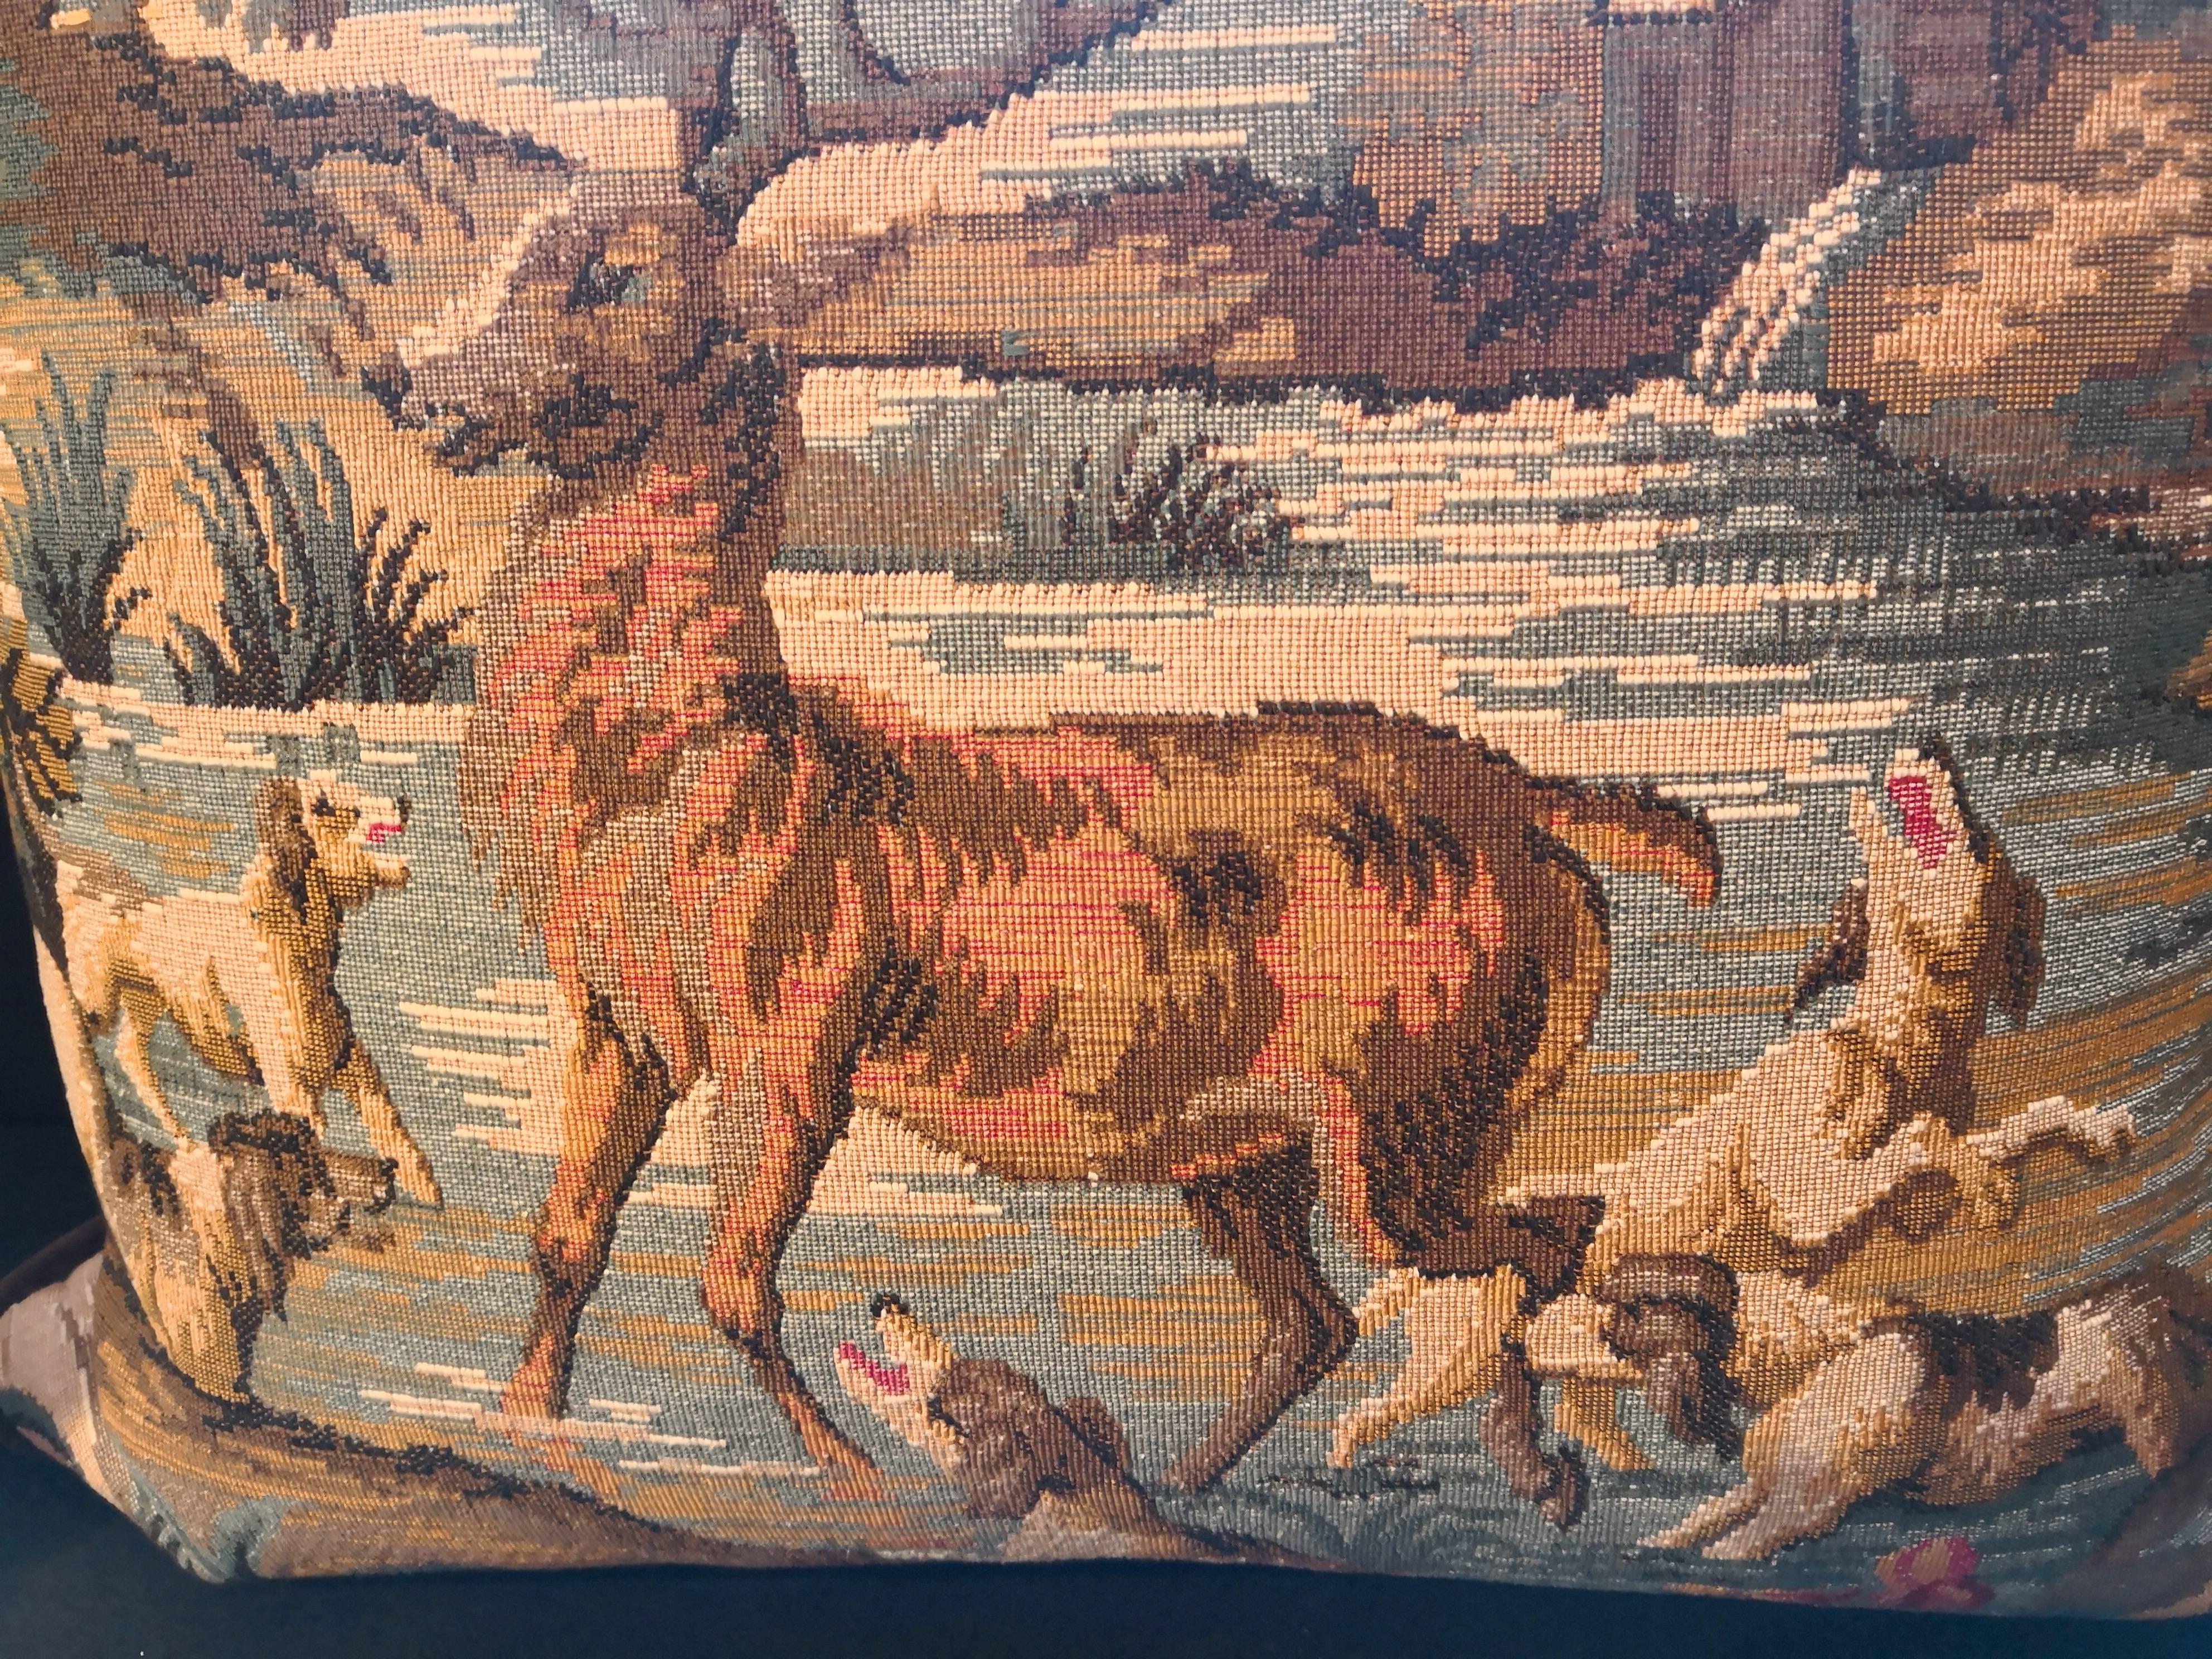 19th century German tapestry fragment made into a cushion. Backside dark brown velvet. The tapestry shows a traditional hunting scene with a dear and dogs. In the background a landscape in blue and yellow. Framed with dark brown velvet and backside